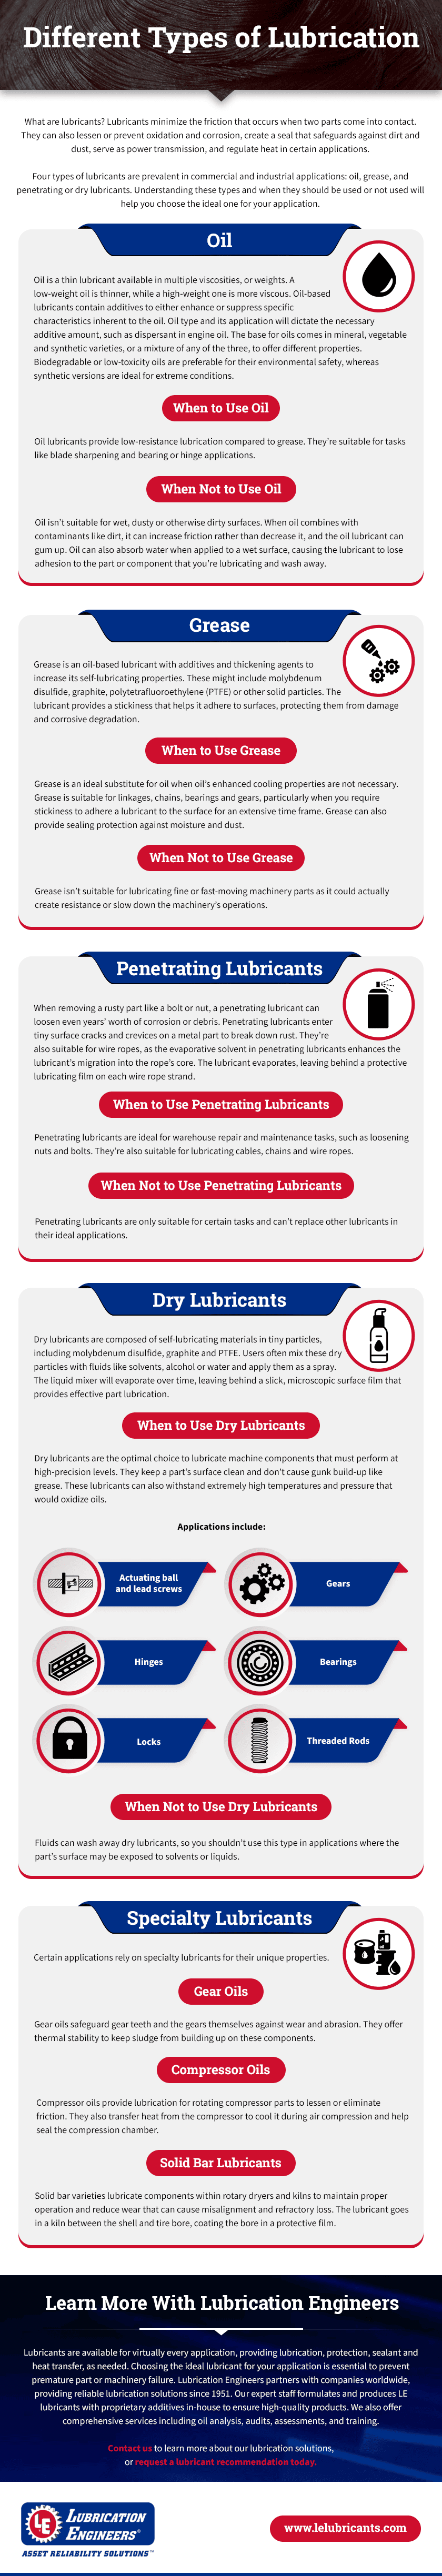 Different Types of Lubrication